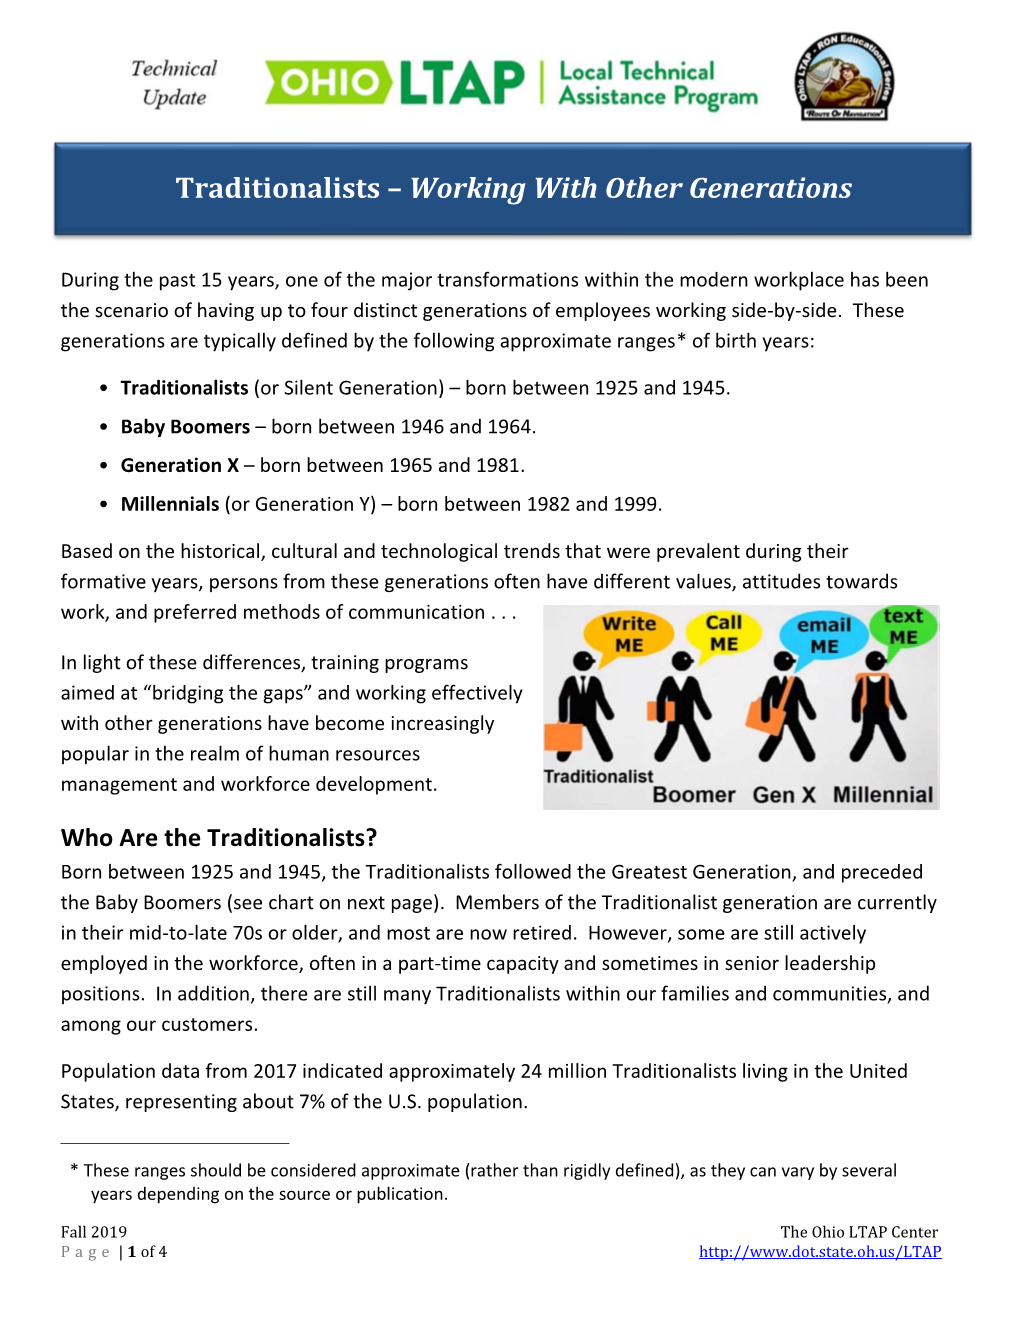 Traditionalists – Working with Other Generations